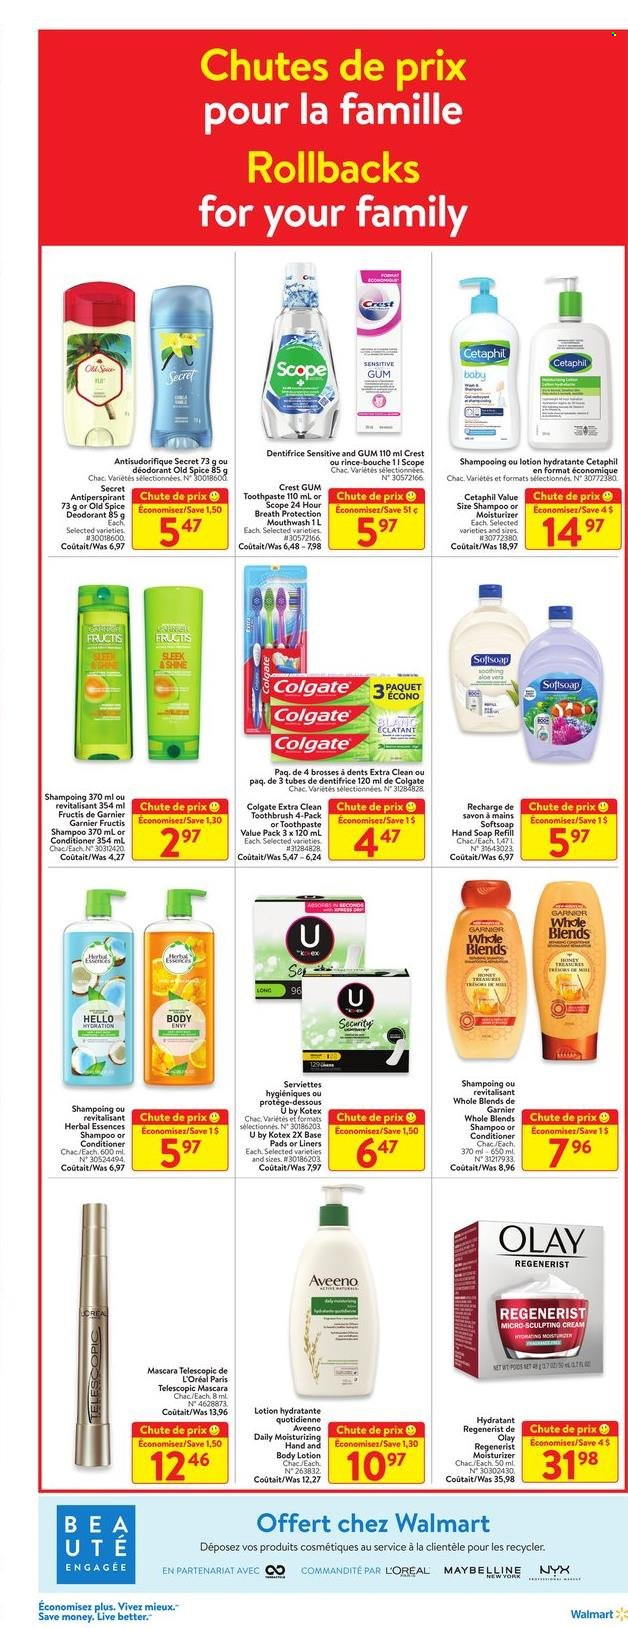 thumbnail - Walmart Flyer - January 26, 2023 - February 01, 2023 - Sales products - spice, honey, Aveeno, Softsoap, hand soap, soap, toothbrush, toothpaste, mouthwash, Crest, sanitary pads, Kotex, L’Oréal, moisturizer, Olay, NYX Cosmetics, conditioner, Herbal Essences, Fructis, body lotion, anti-perspirant, mascara, Maybelline, scope, Colgate, Garnier, shampoo, Old Spice, deodorant. Page 7.